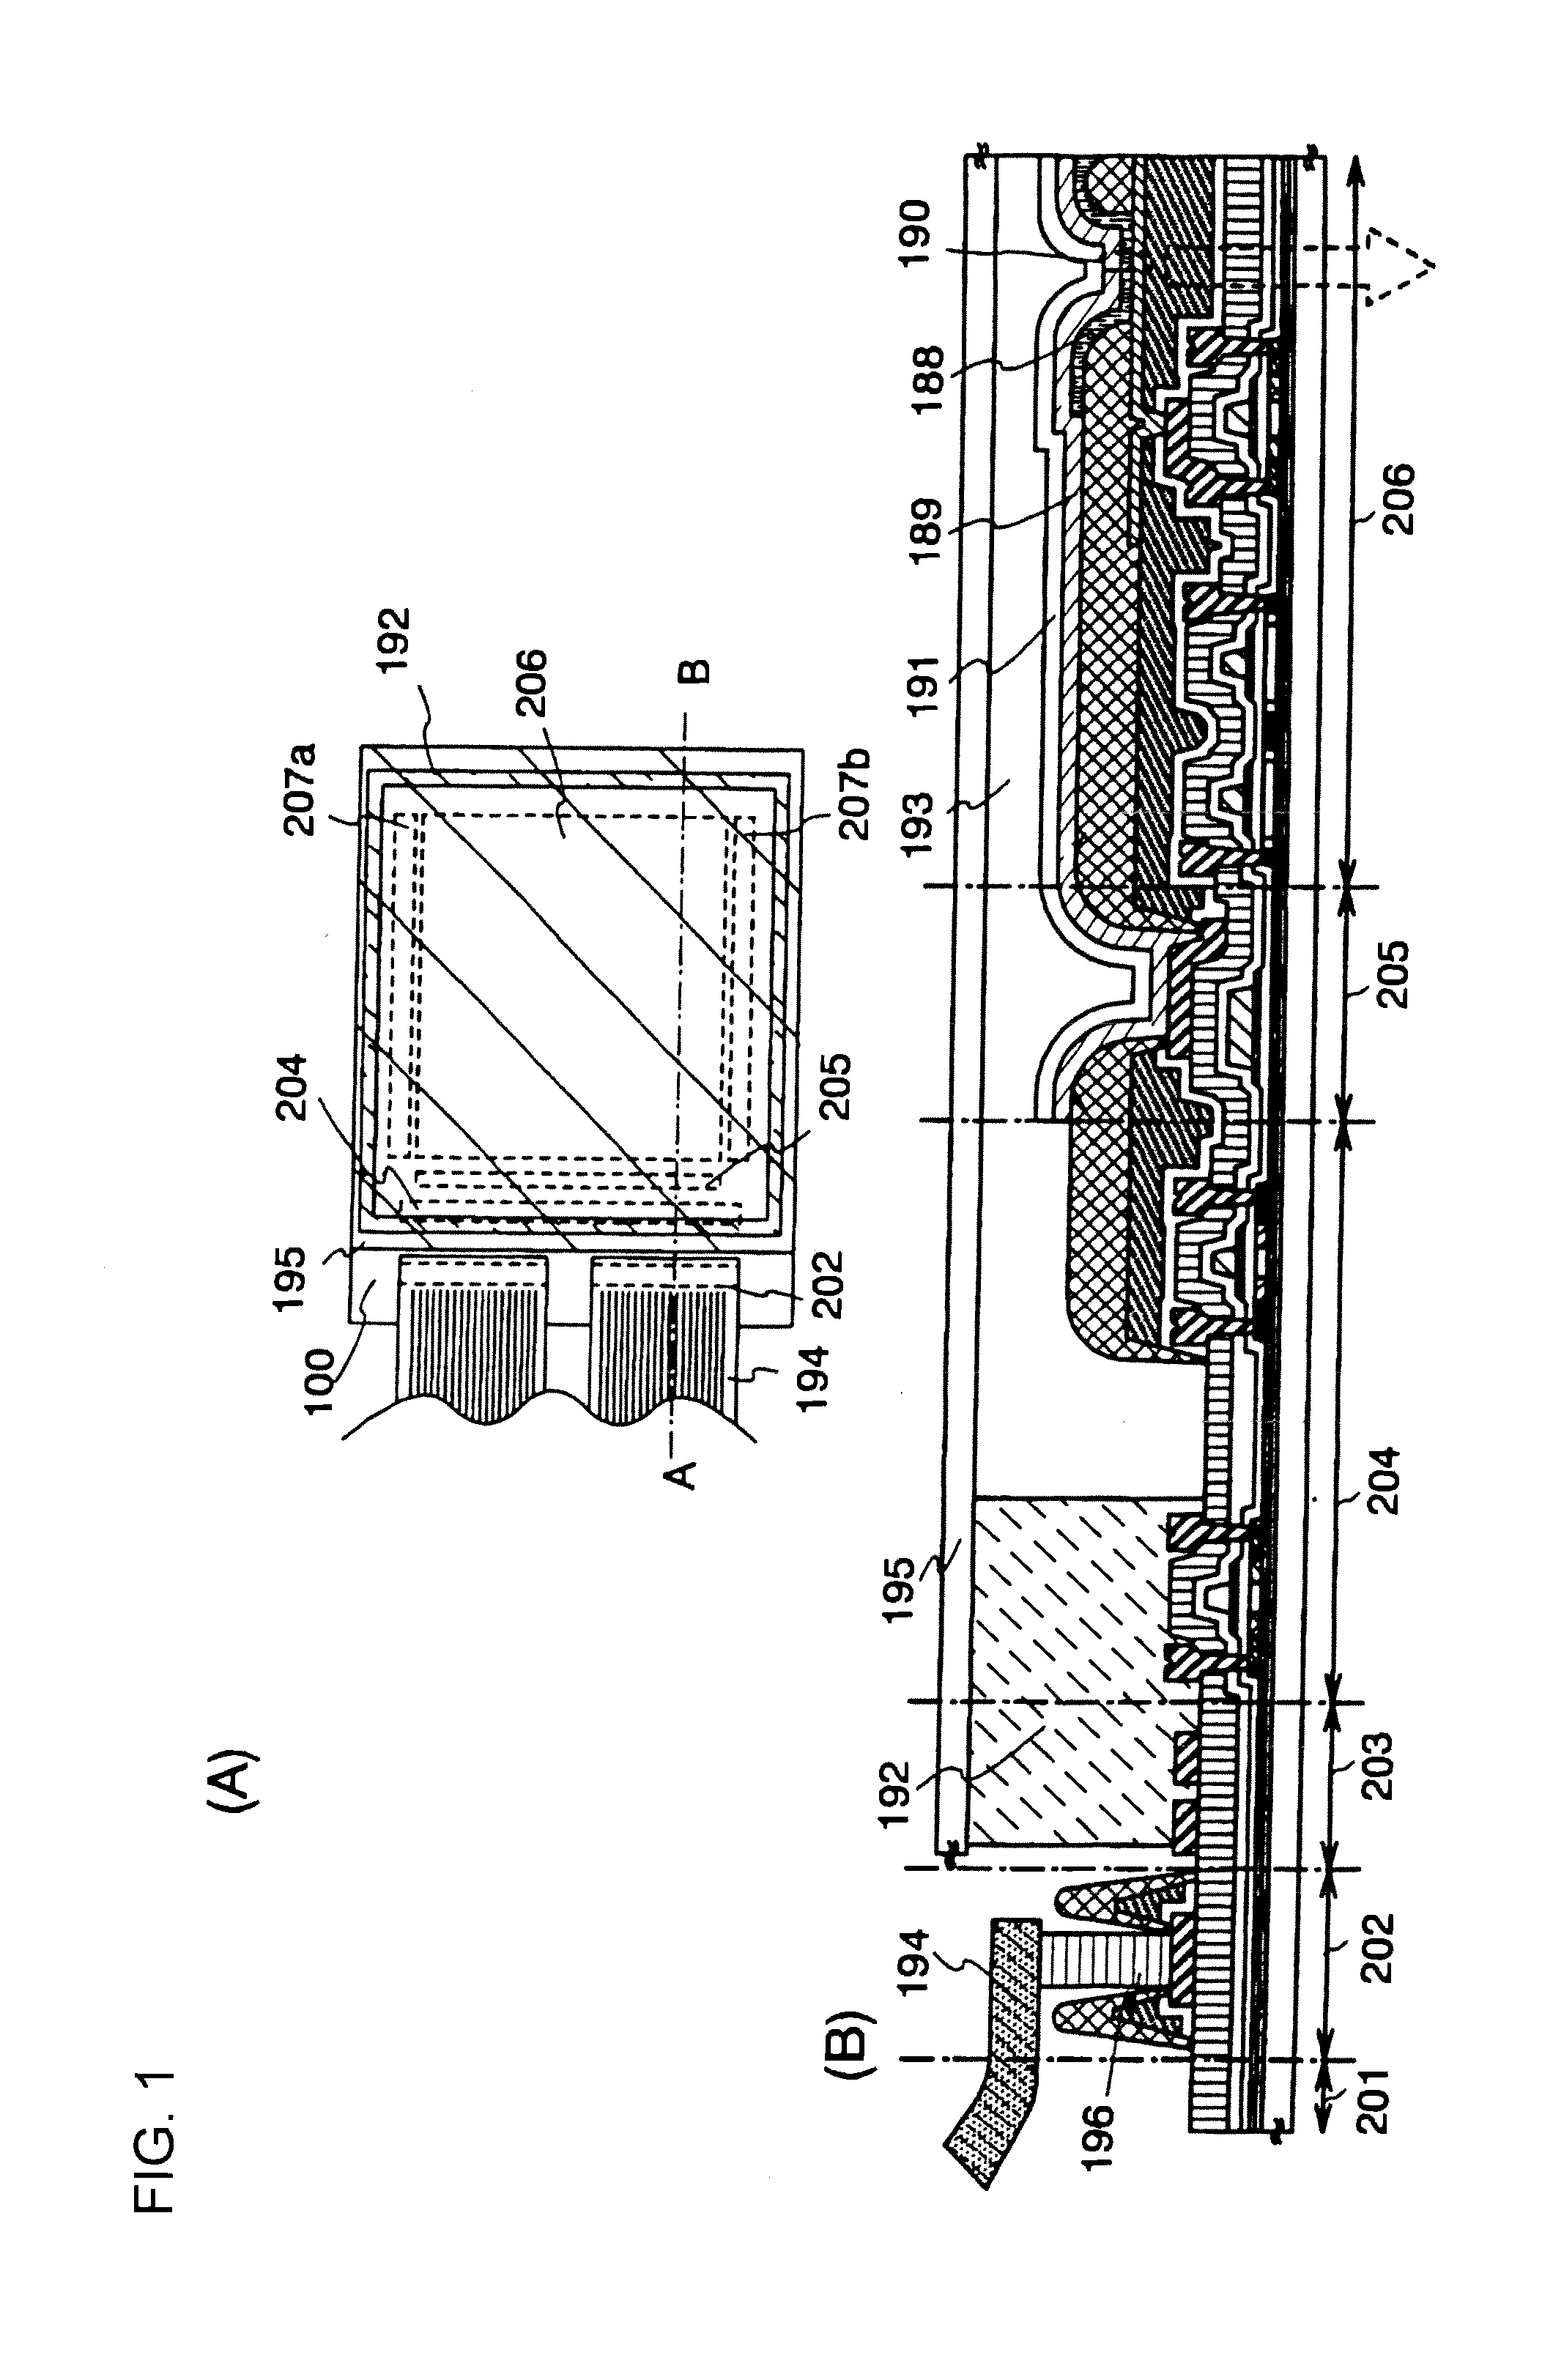 Display device and method for manufacturing the display device